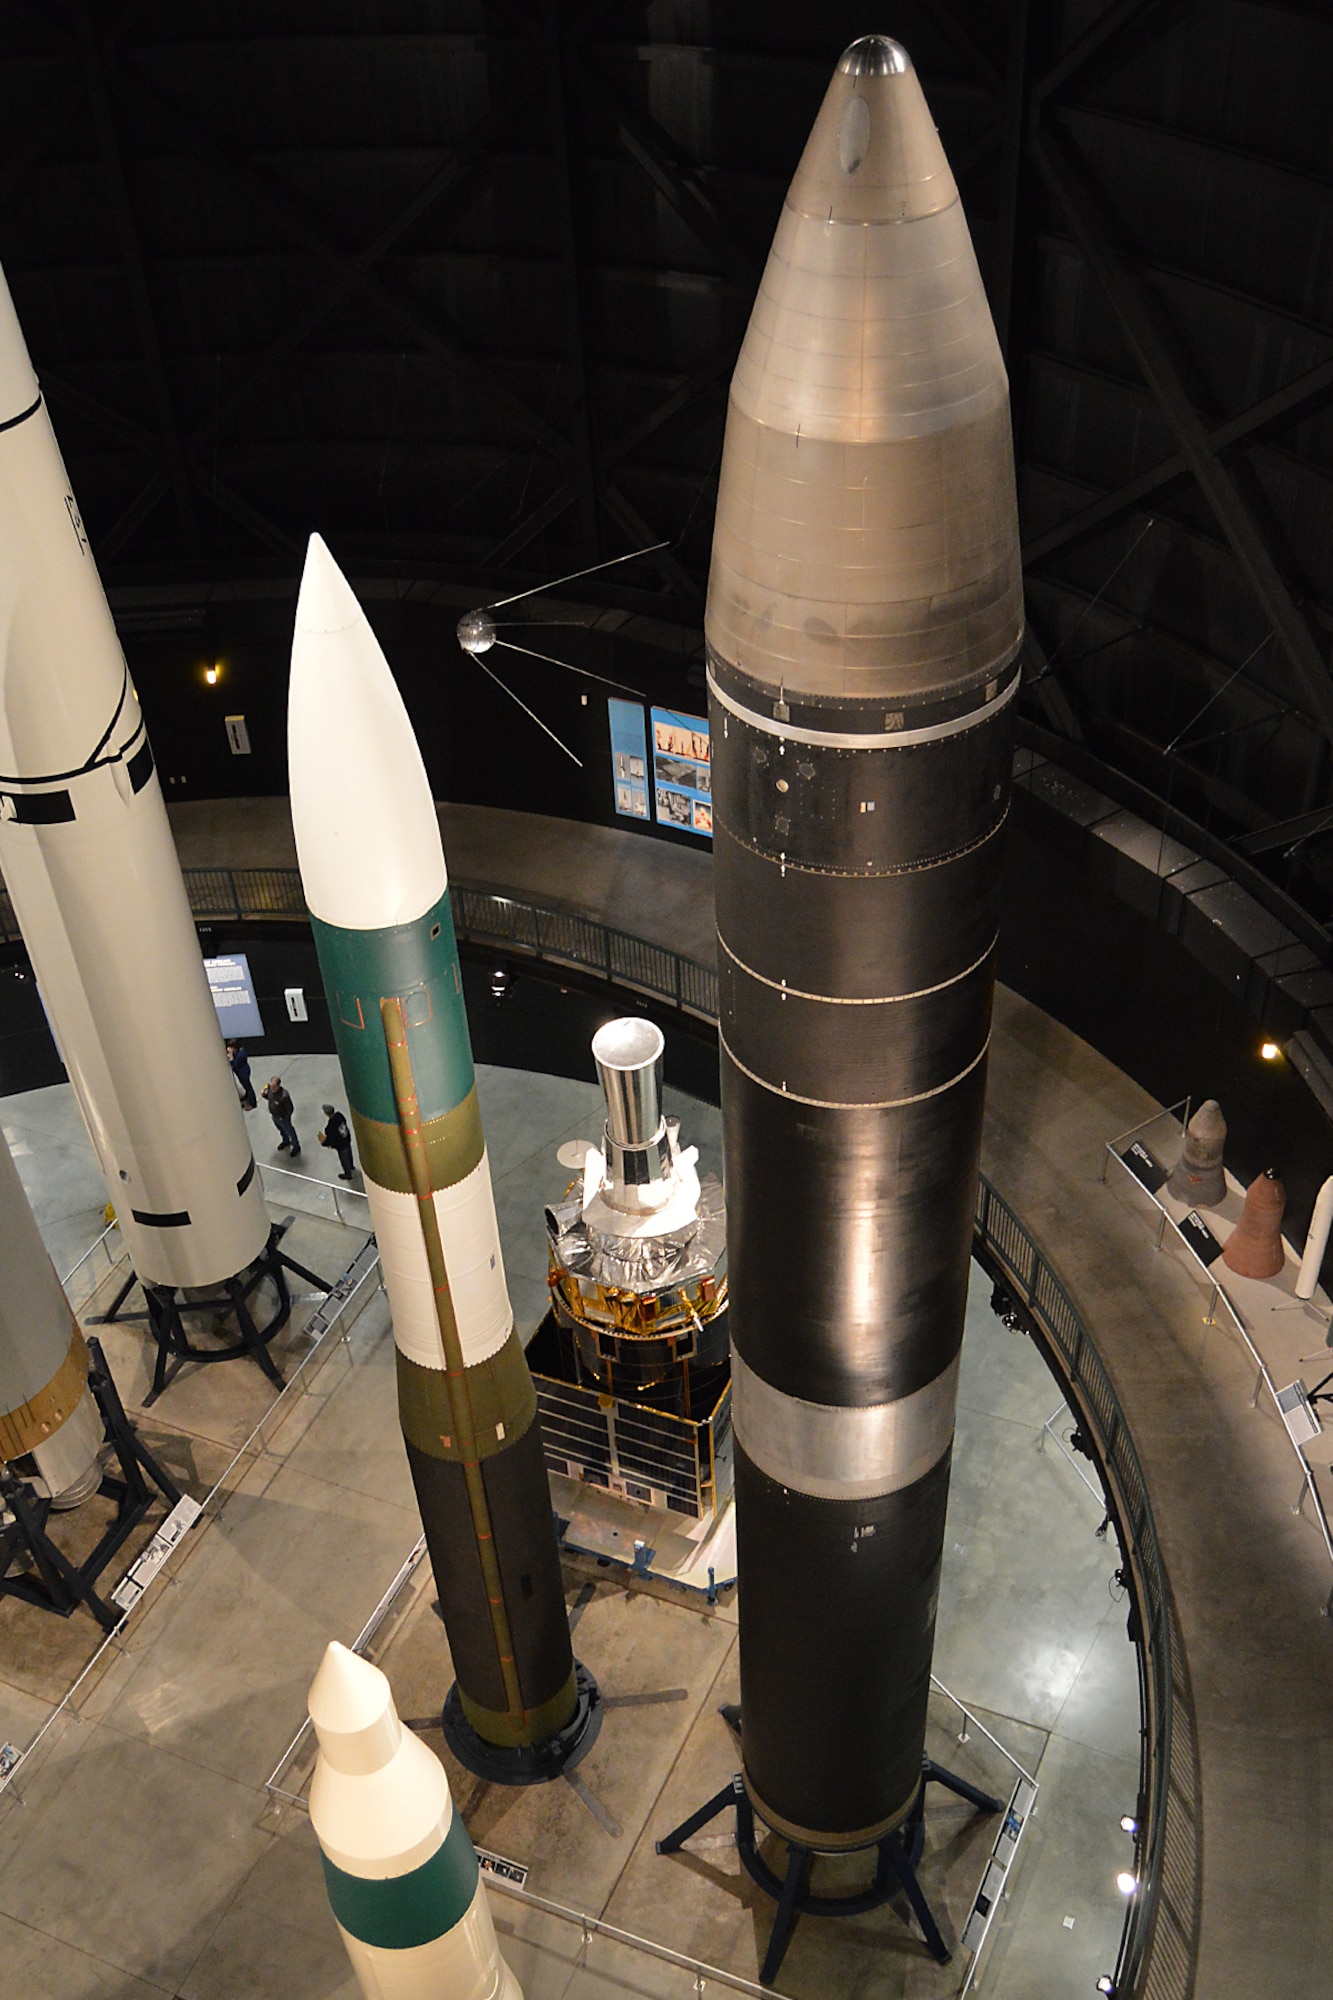 DAYTON, Ohio -- The Boeing LGM-118A Peacekeeper missile on display in the Missile & Space Gallery at the National Museum of the U.S. Air Force. (U.S. Air Force photo)
